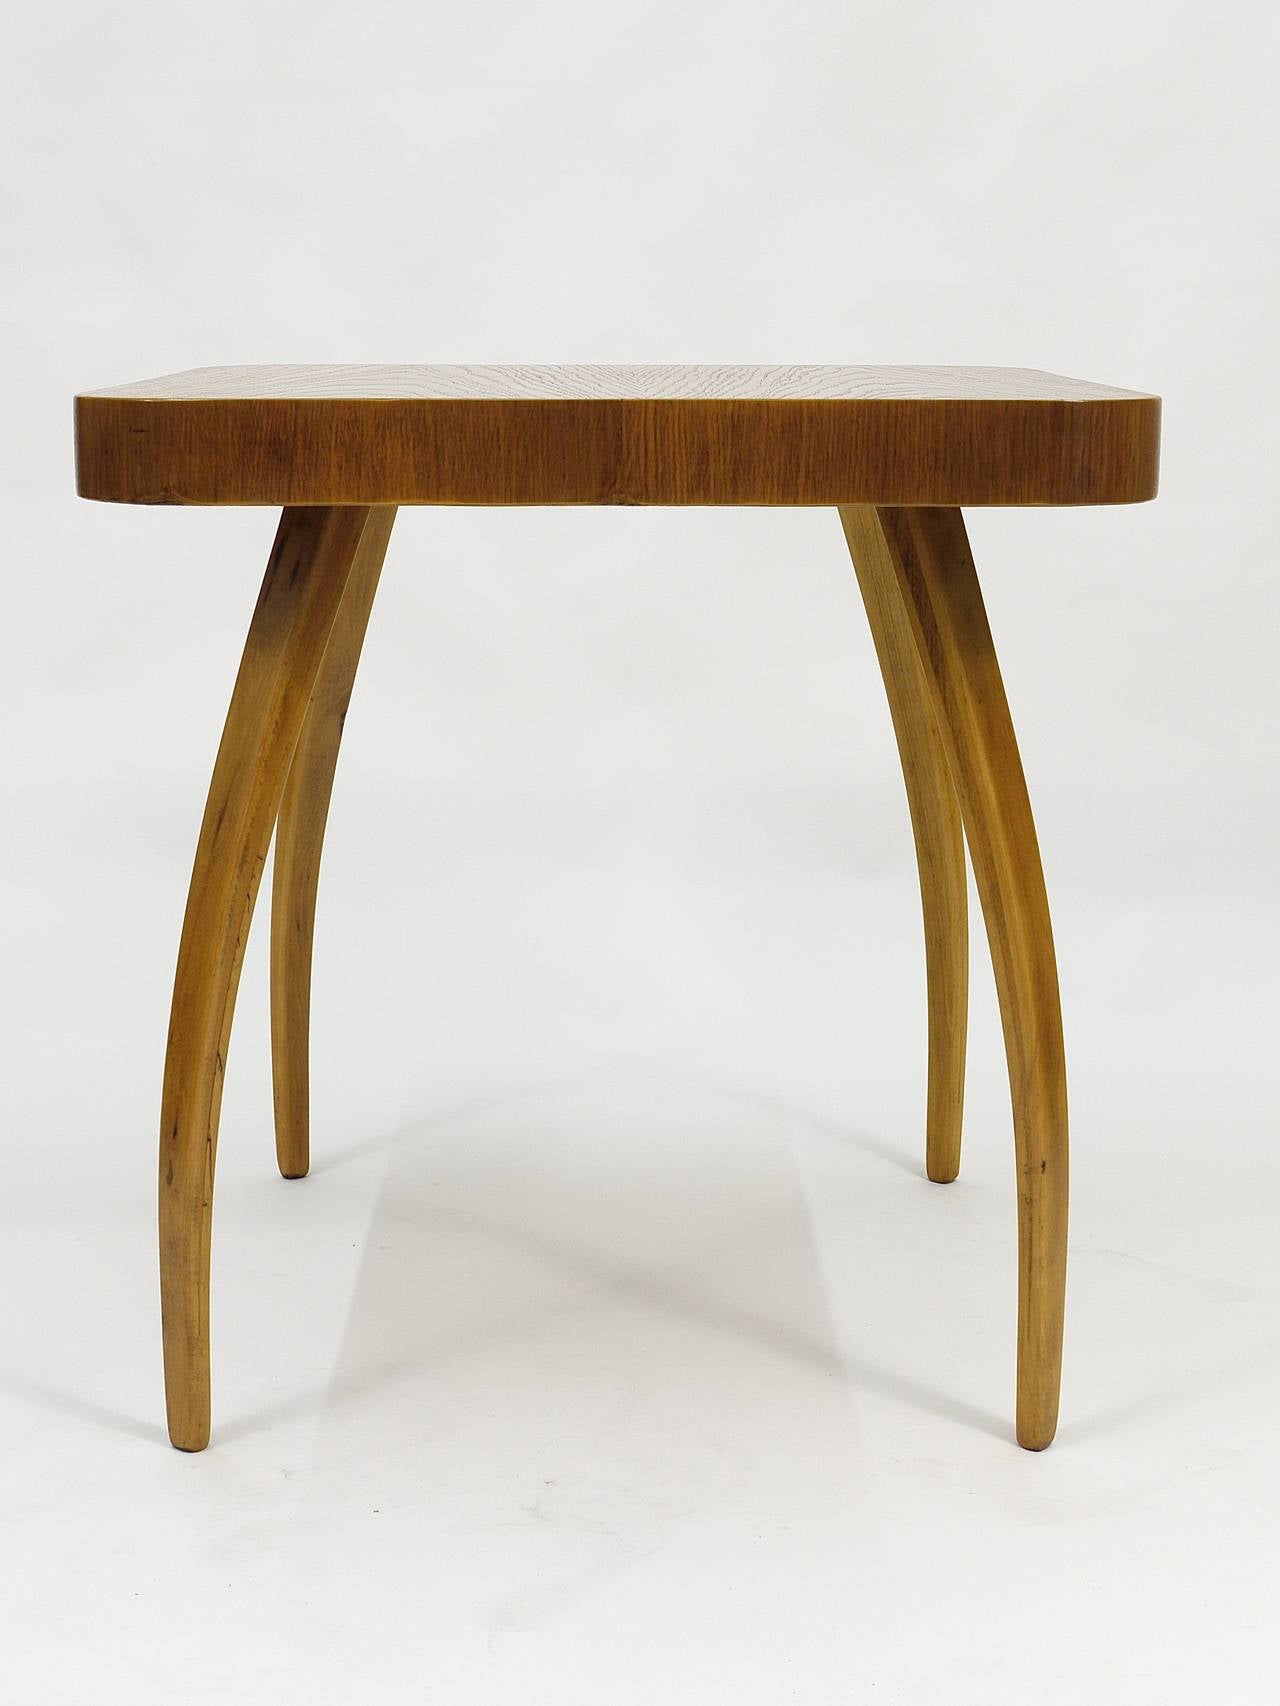 A very beautiful and elegant spider table, model H259 from the 1930s, designed by Jindrich Halabala, who worked in the 1930s for Gropius at the Bauhaus. Executed by Spojene UP Zavody, Czechoslovakia. To use as a coffee or side table. In excellent